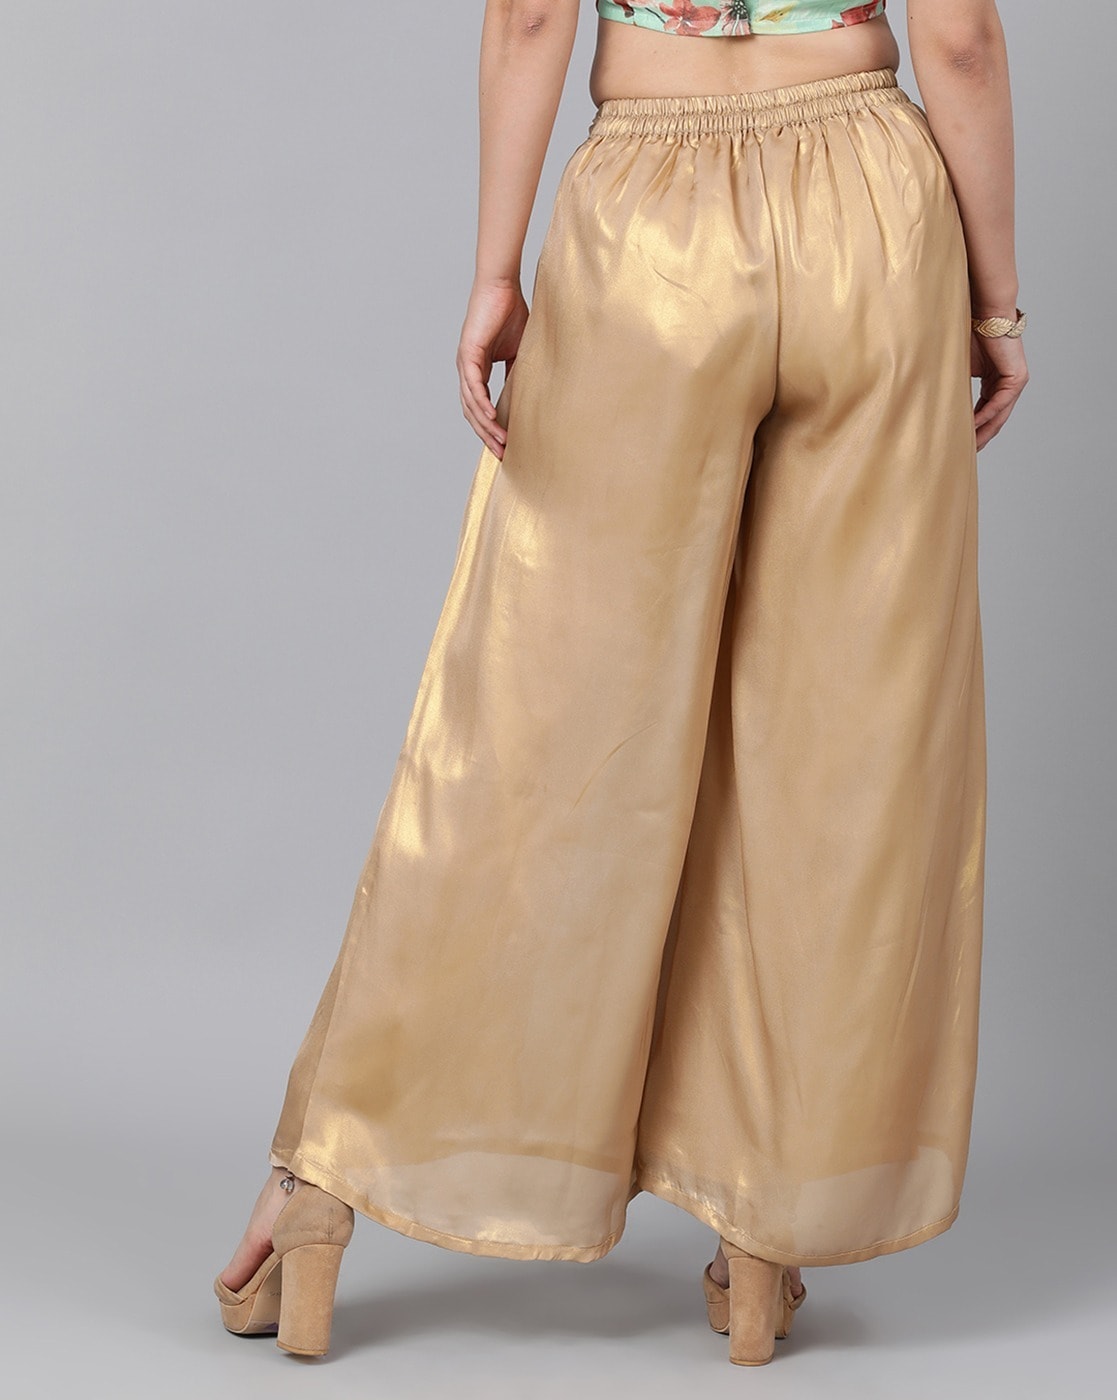 Gold Skin Color Stretch Pintucks Pants in Delhi at best price by SHE Brand  Official - Justdial